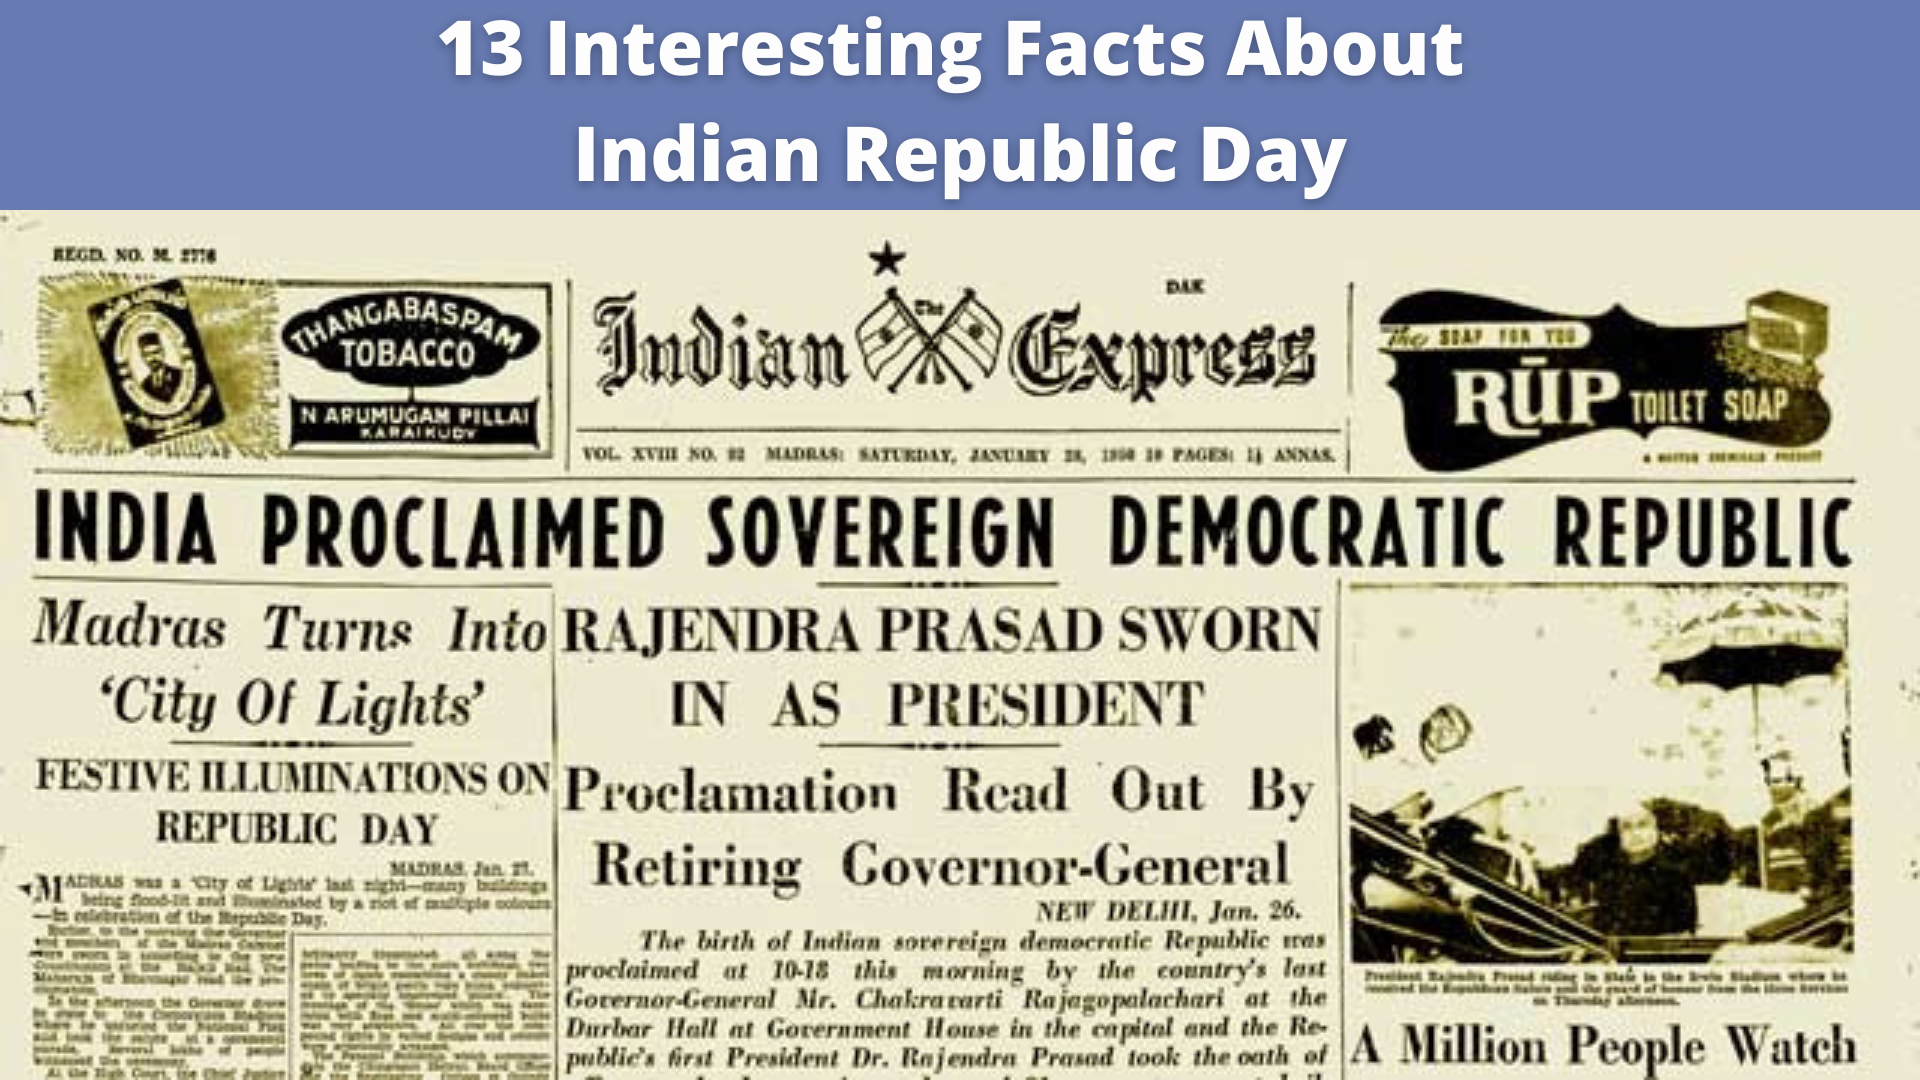 13_Interesting_Facts_About_Indian_Republic_Day